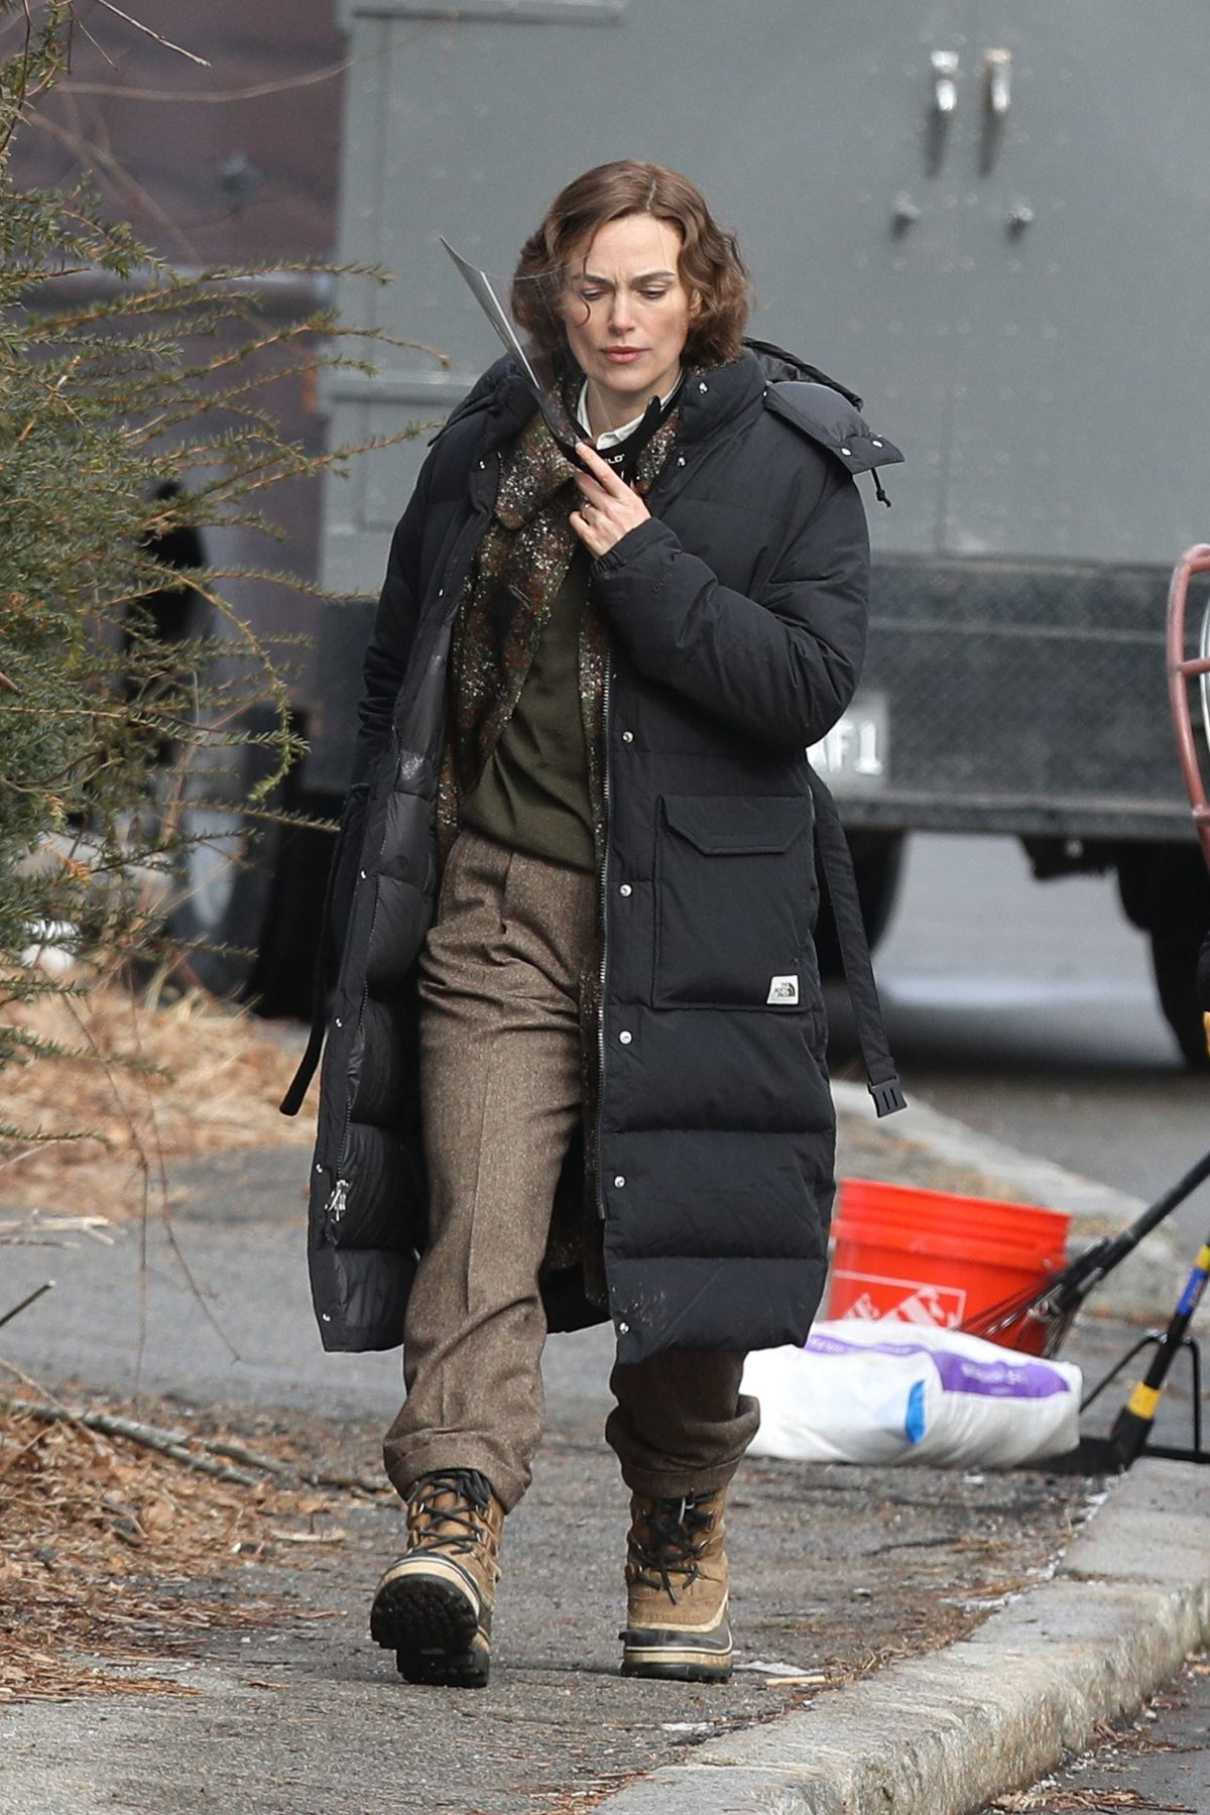 Keira Knightley in a Black Puffer Coat Was Seen Out in Boston 01/24 ...